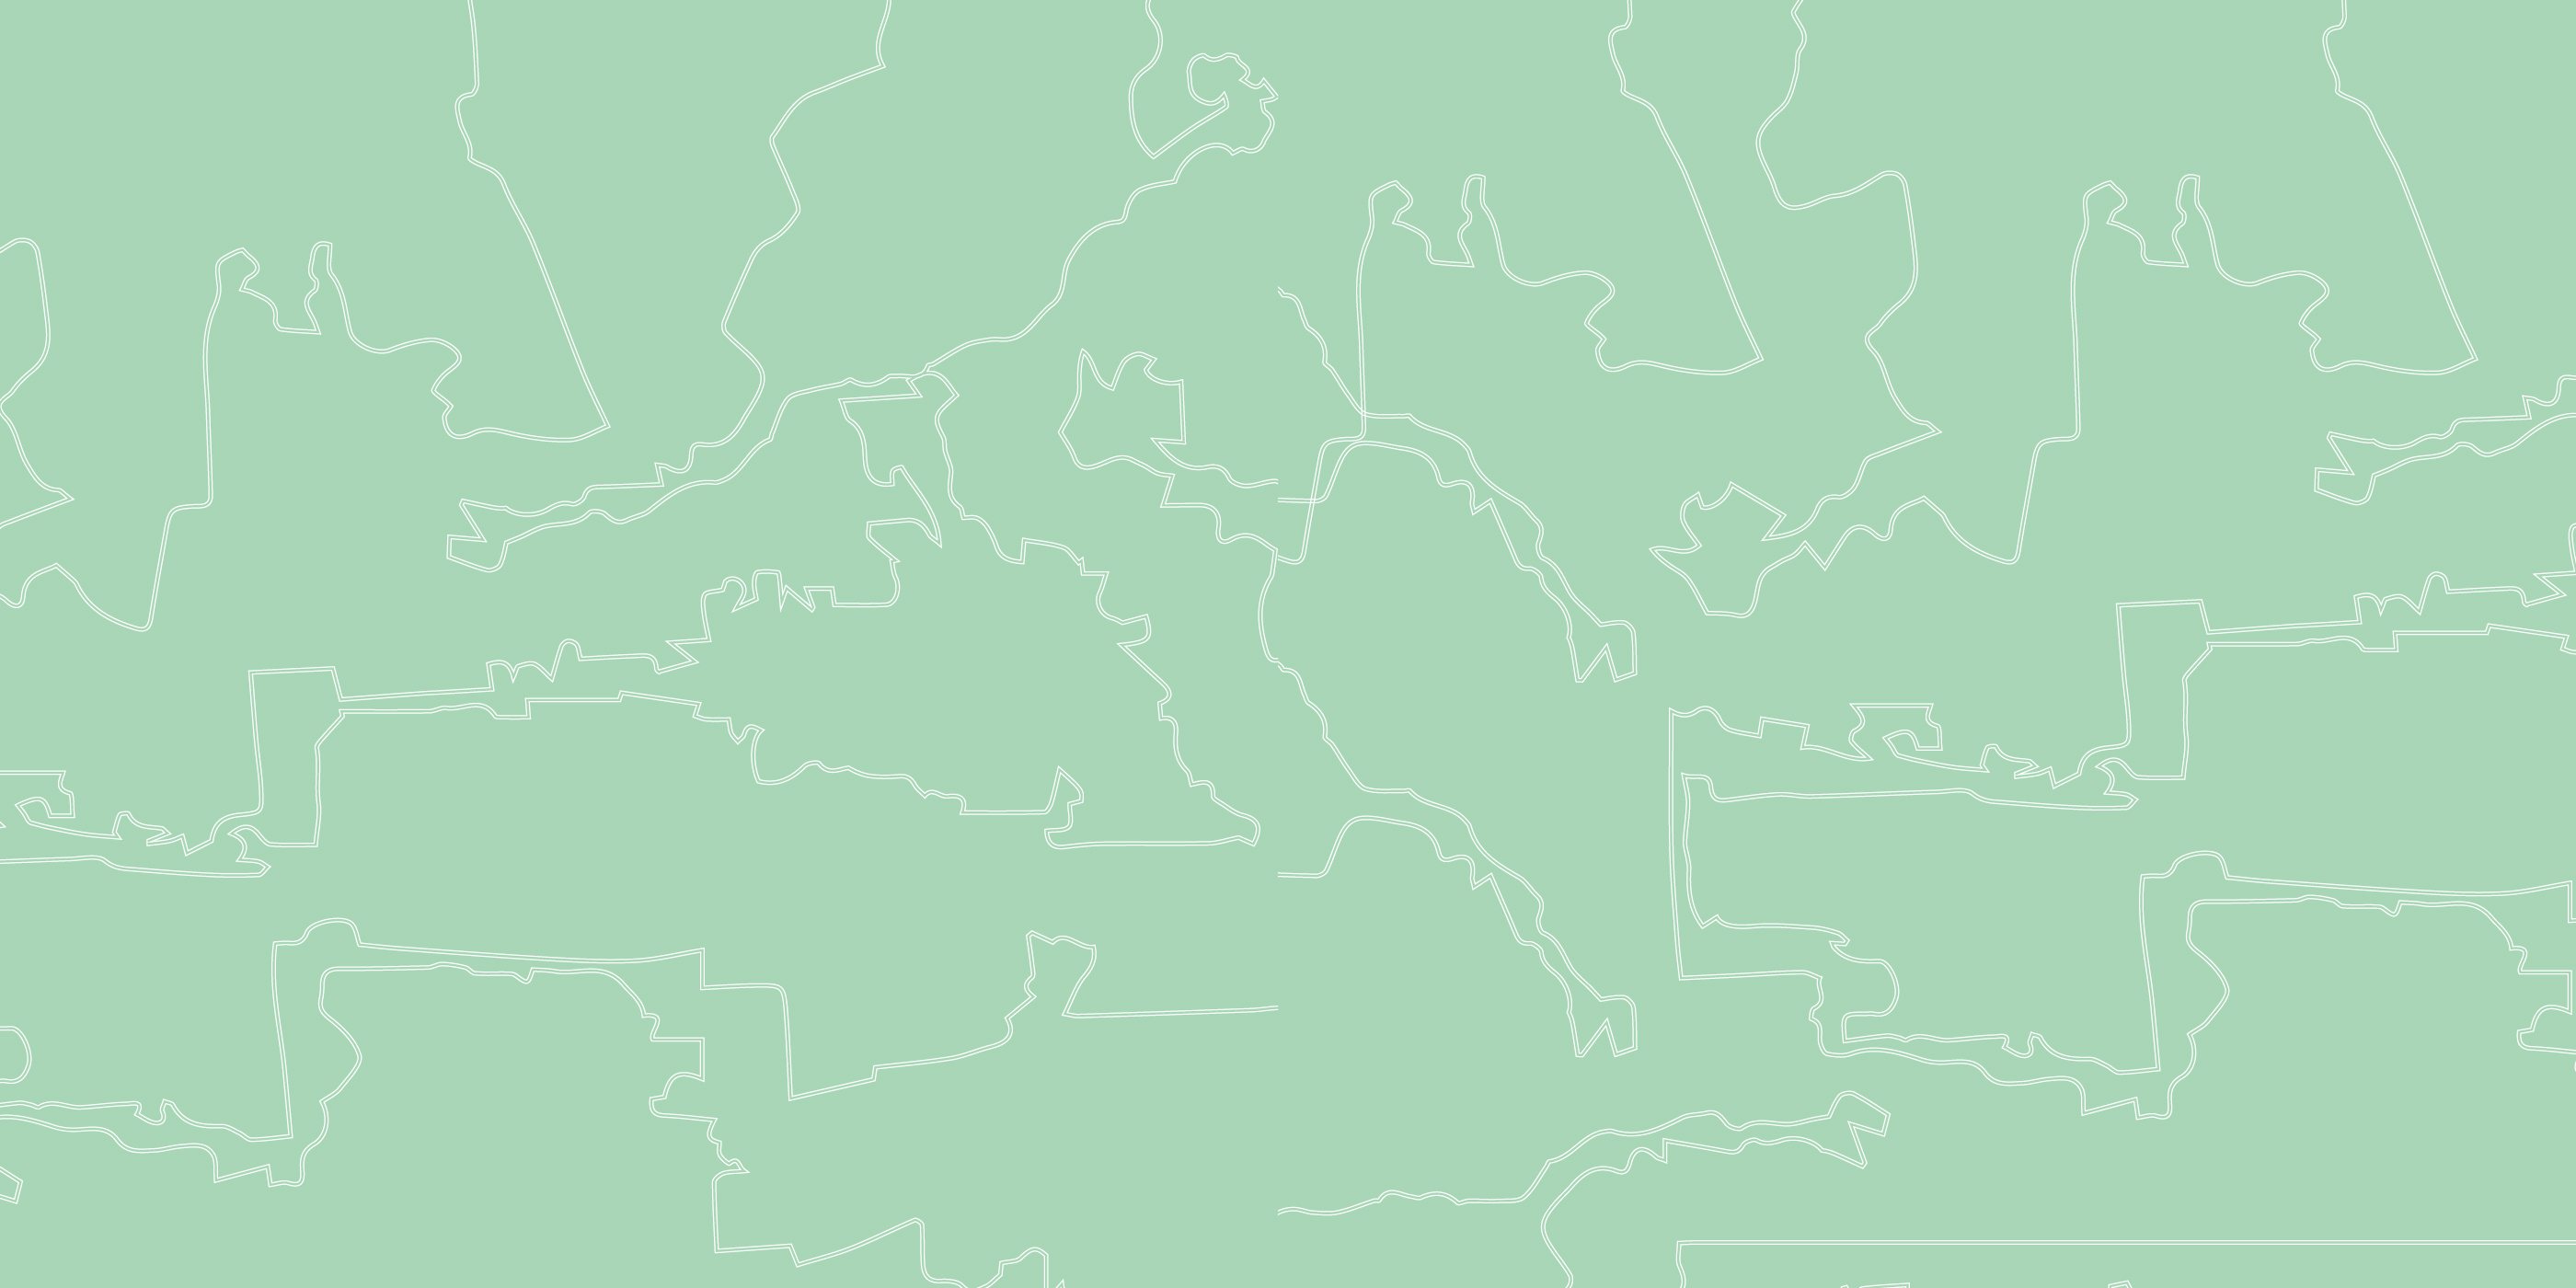 An outline of various states in the United States, against a light green background.